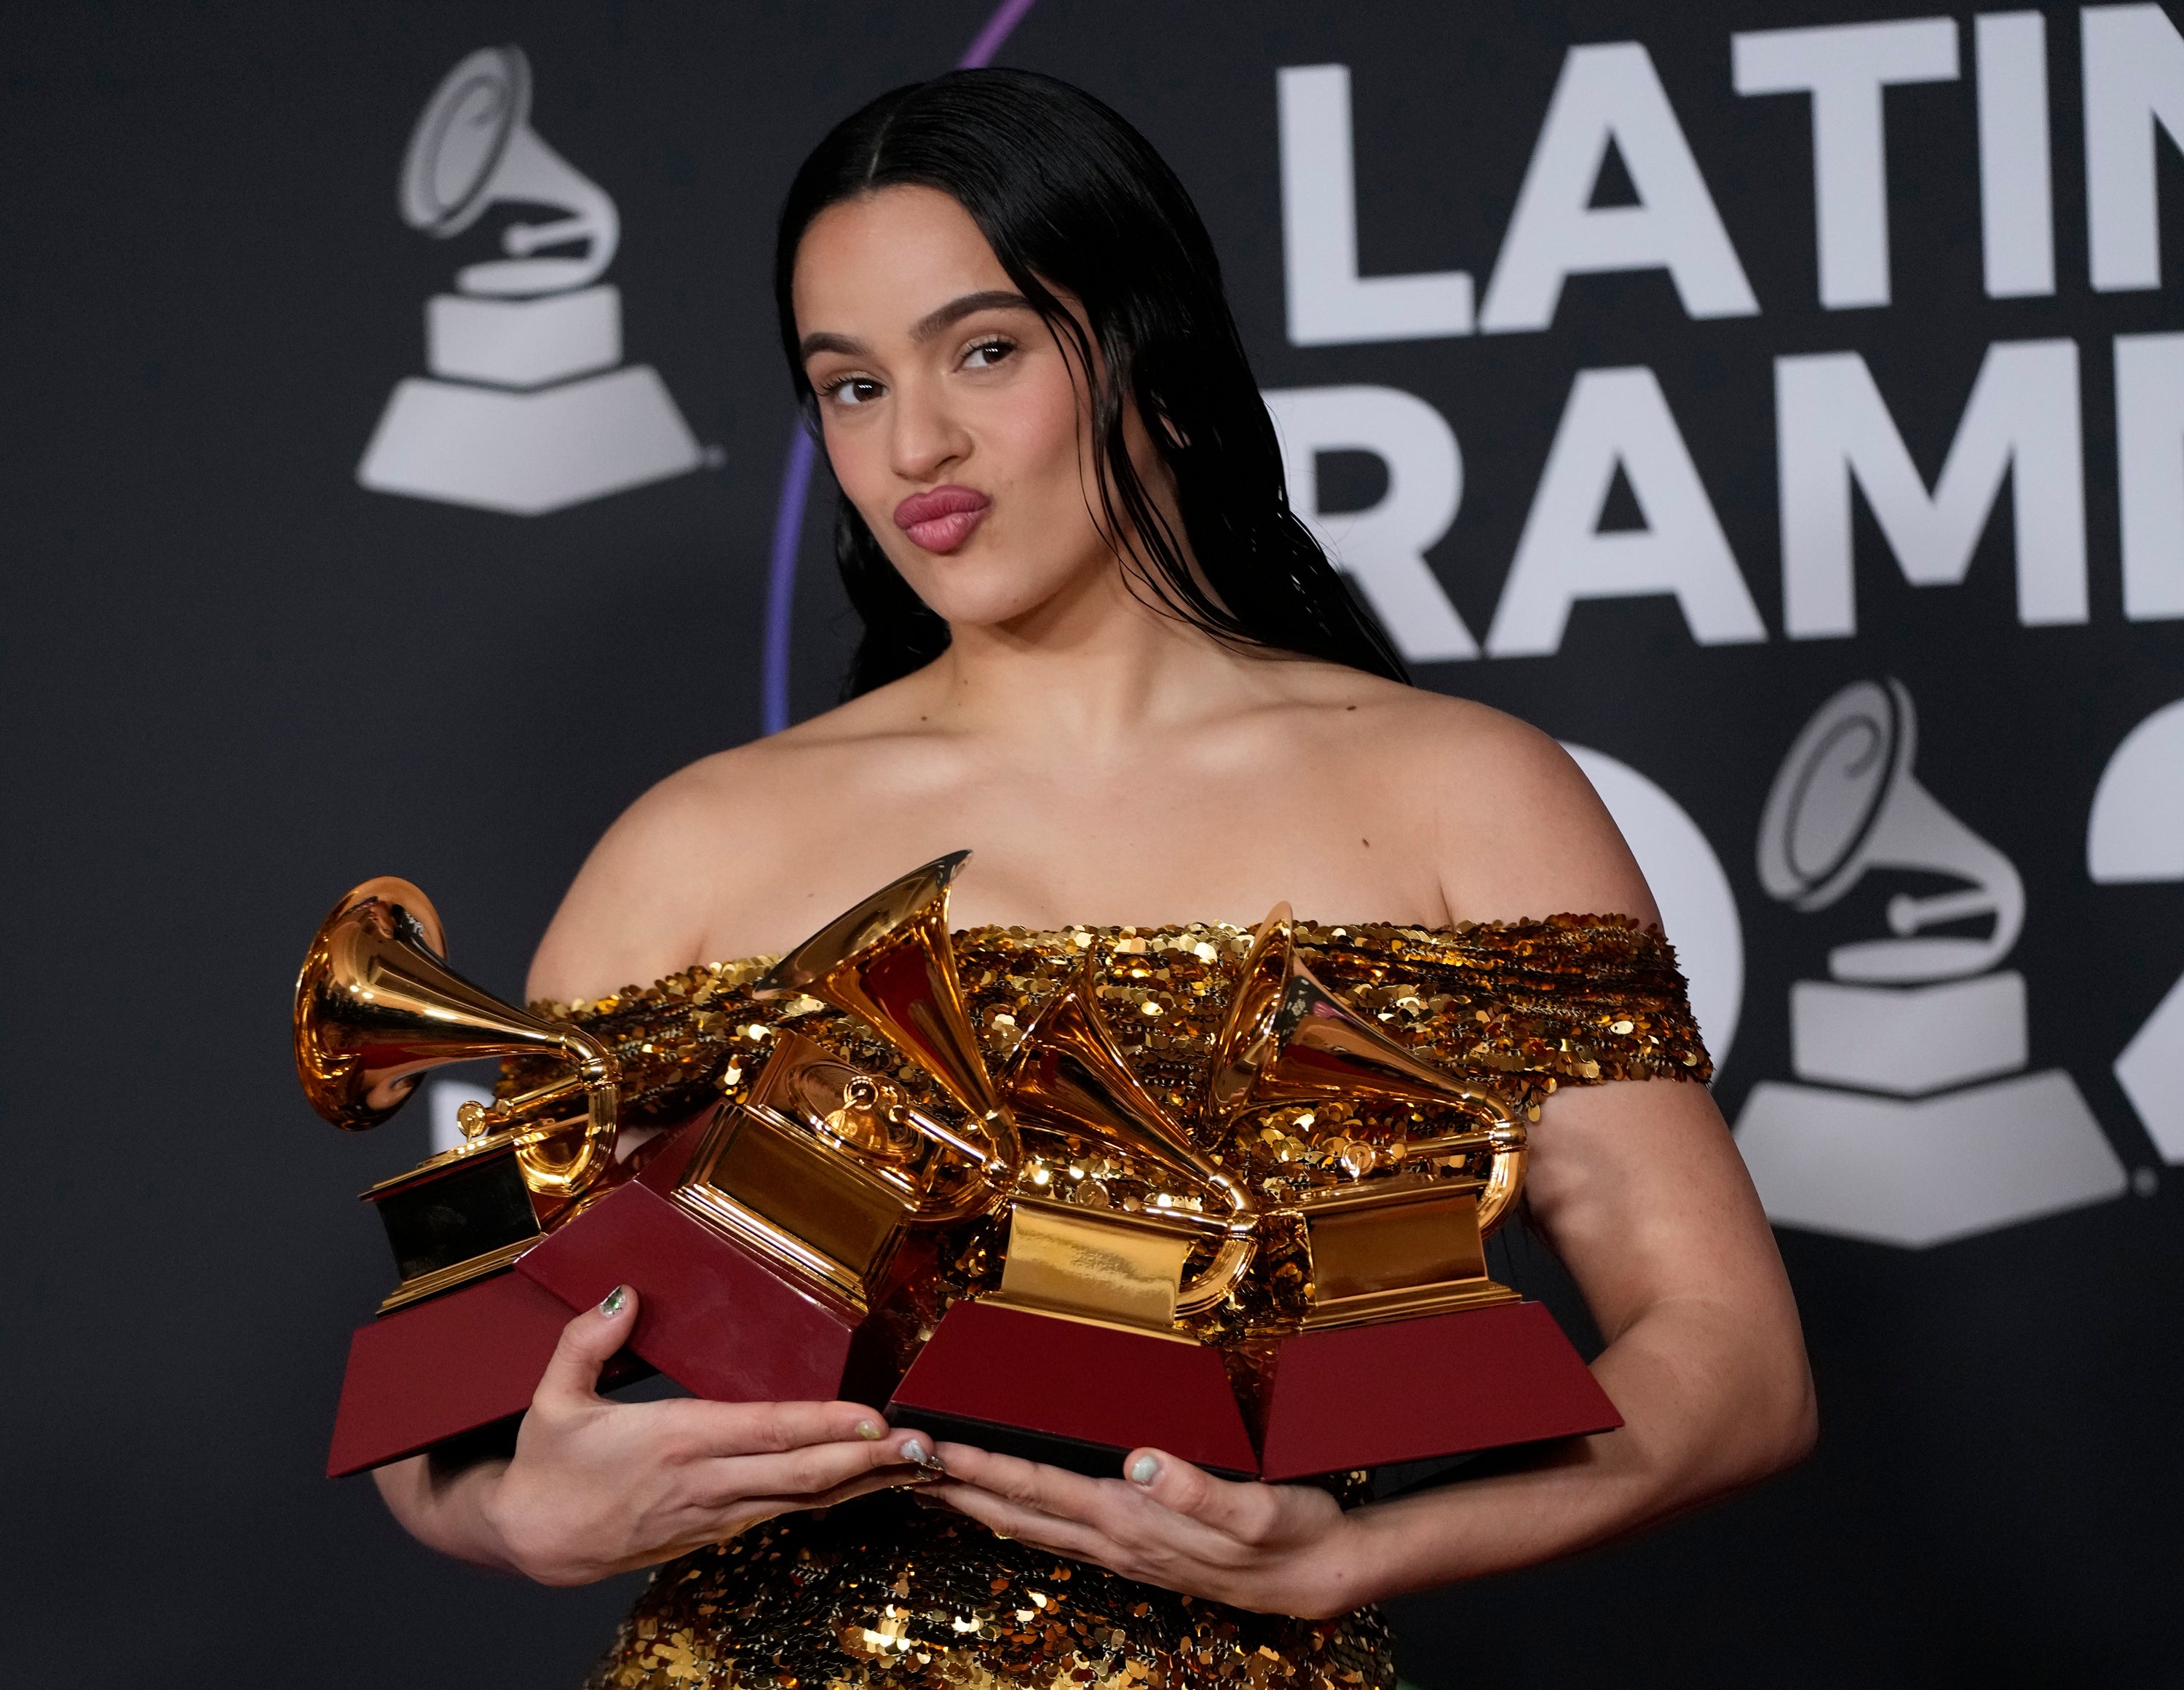 Latin Grammys to be held in Spain, leaving US for 1st time The